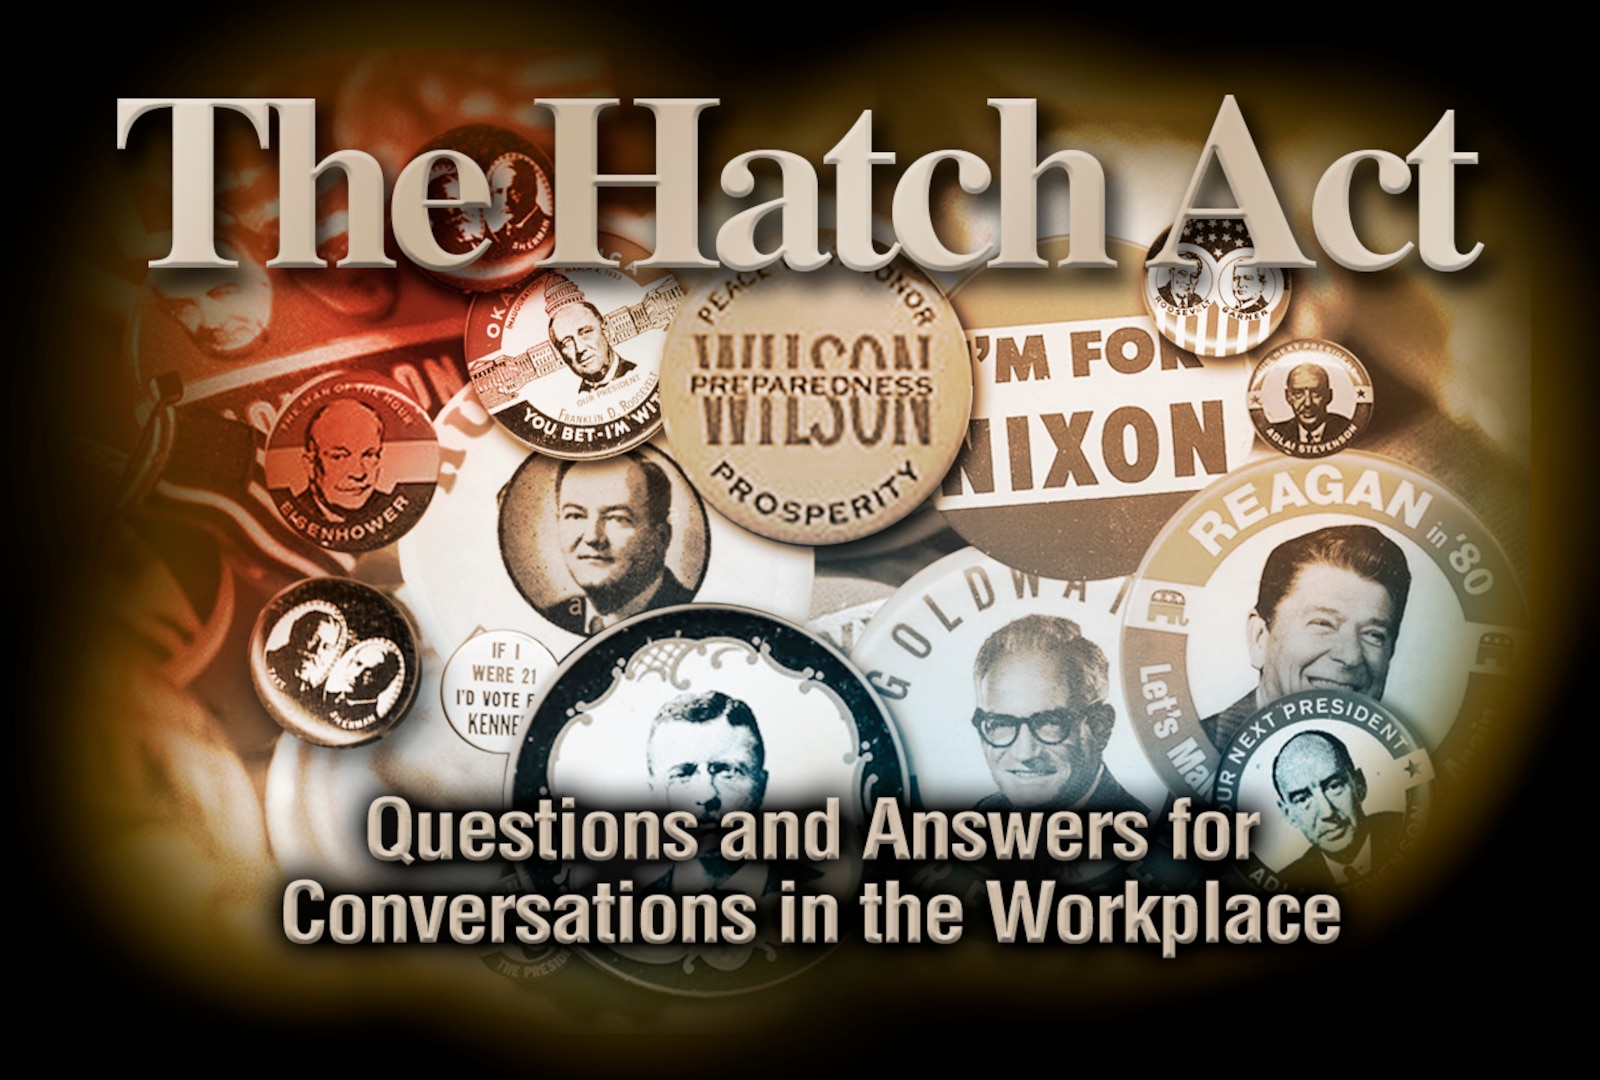 Even in casual workplace conversations, federal employees must abide by the Hatch Act and its restrictions on political expression.